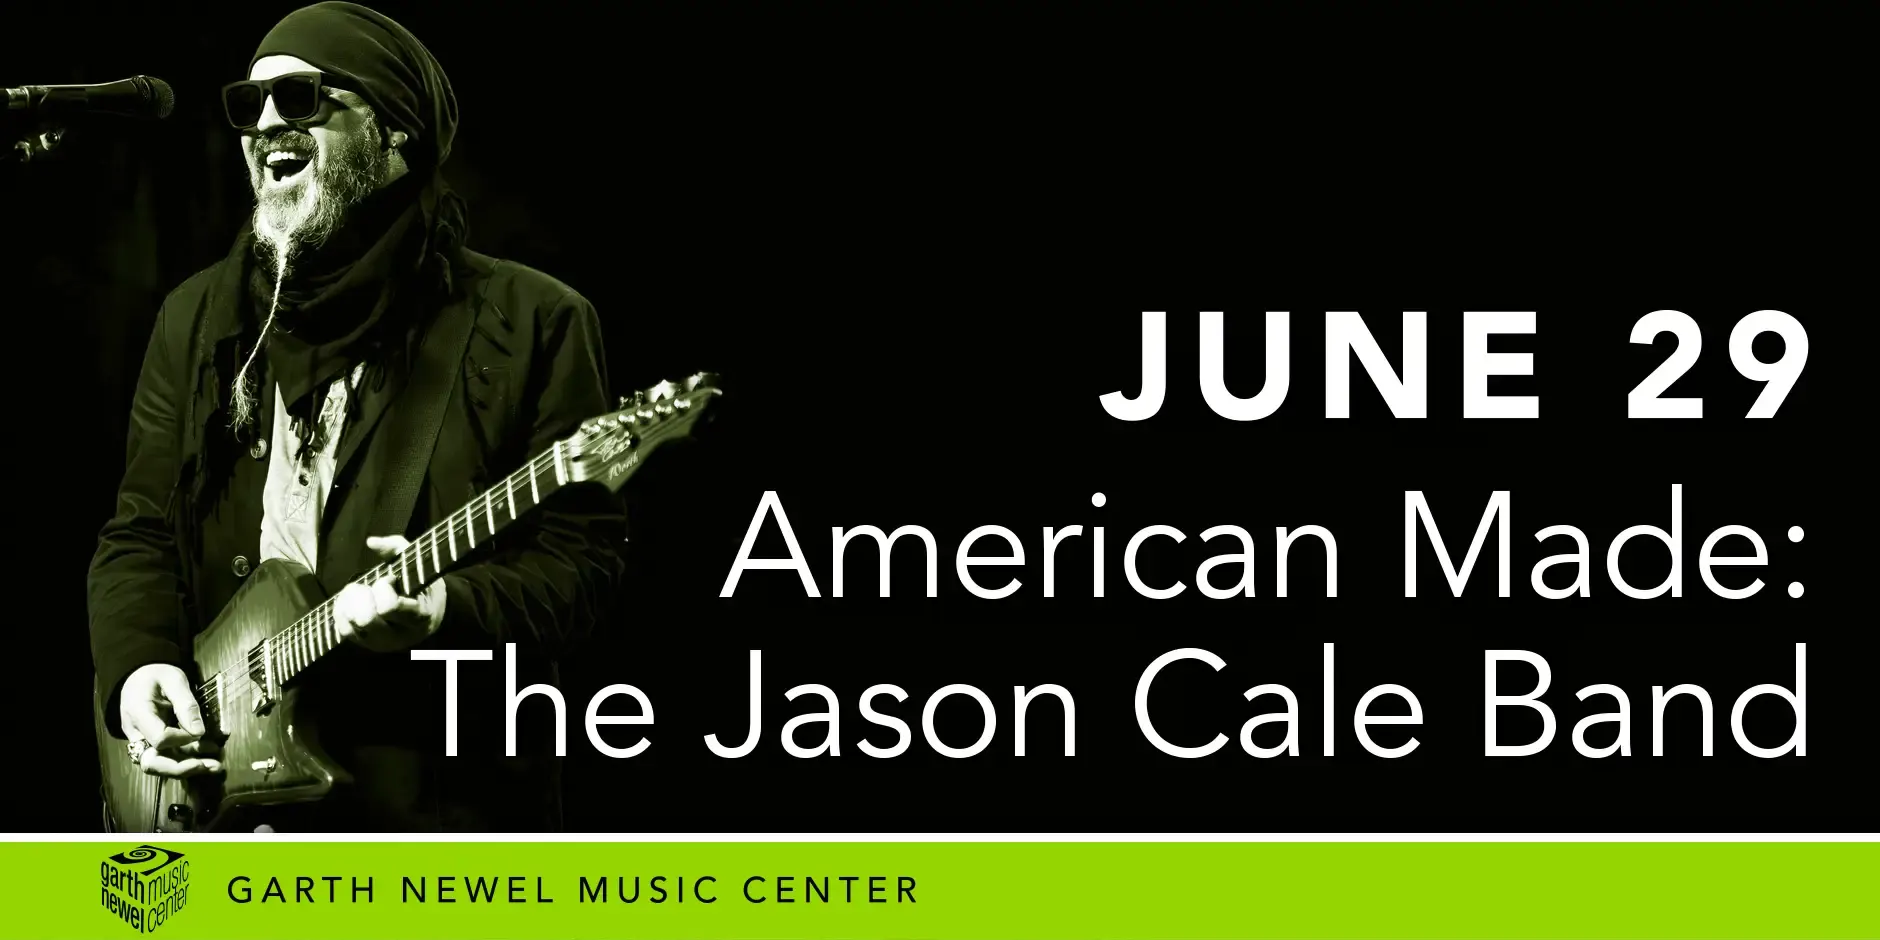 June 29 - American Made: The Jason Cale Band